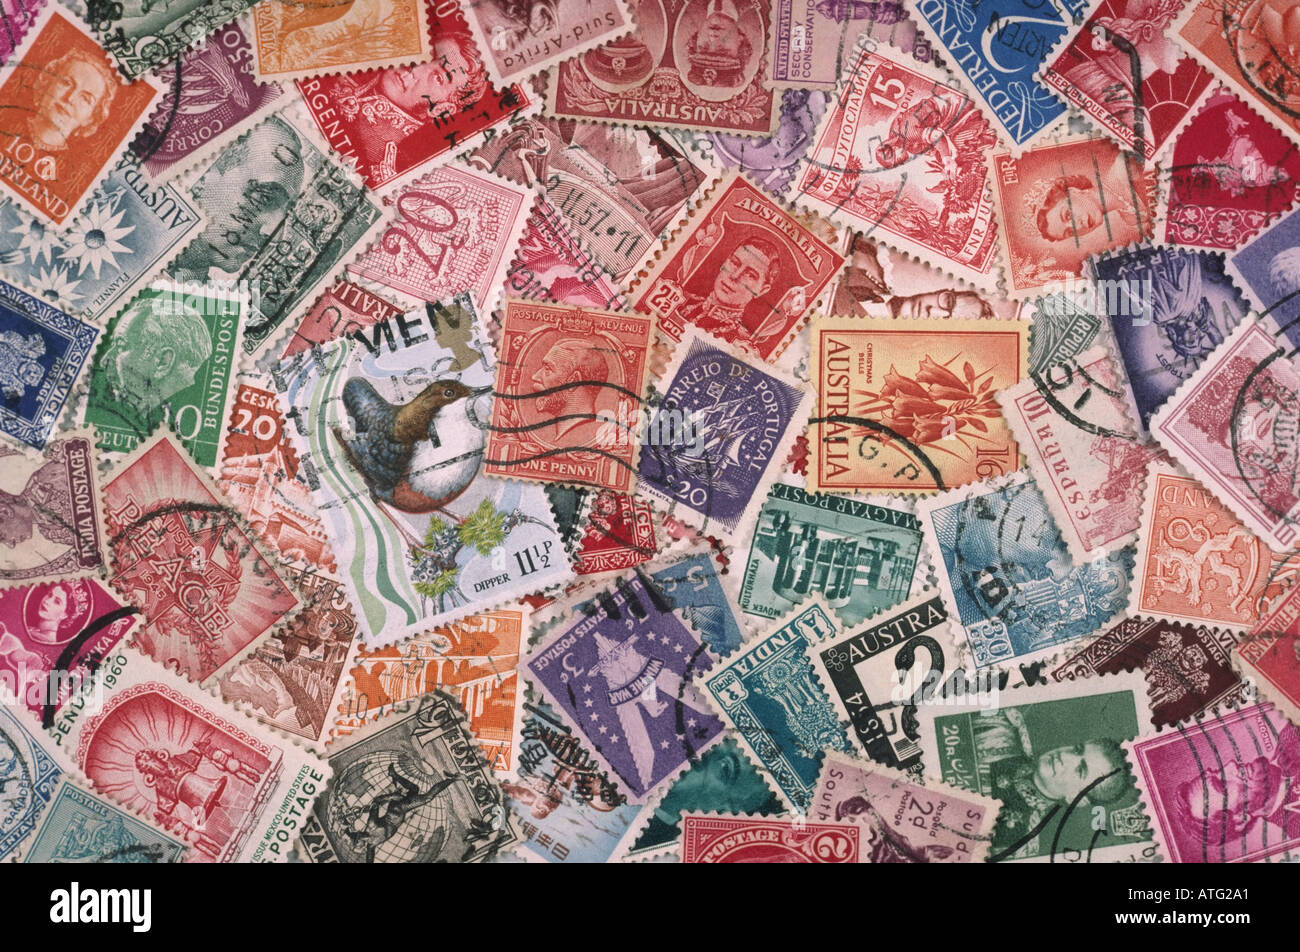 Collection of Old Used Postage Stamps Stock Photo